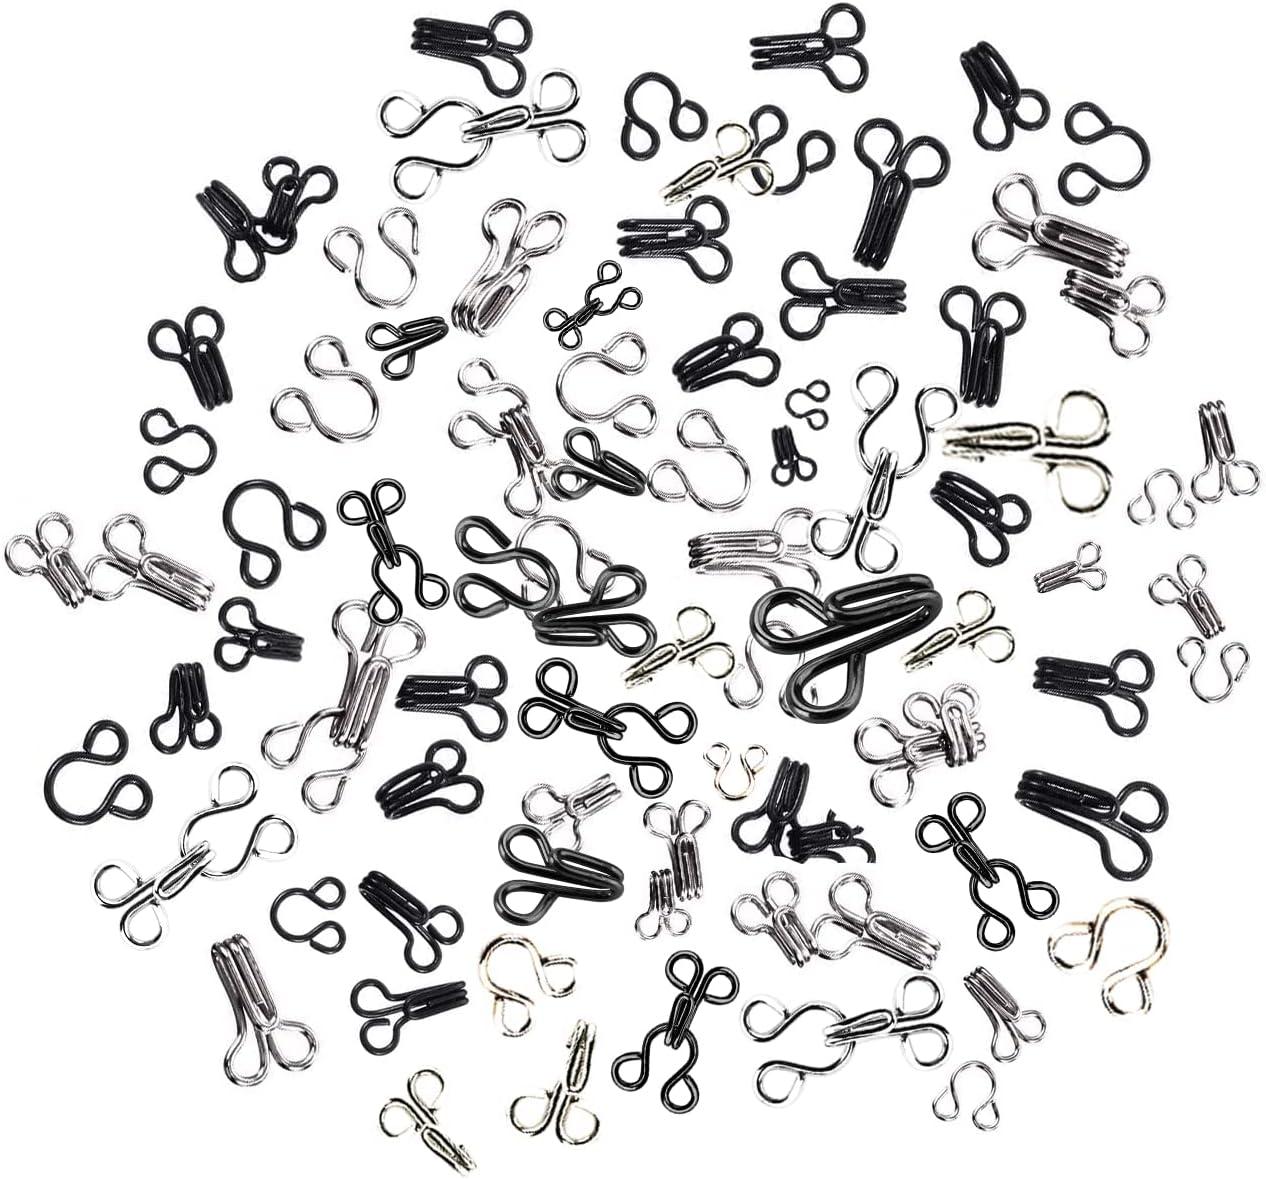 KACOLA 60 Set Sewing Hook and Eye Latch for Clothing, Bra Hooks Replacement,  Large Hooks and Eyes Clasps for Clothing, Sewing DIY Craft, 3 Sizes  23/17/12.5mm, Black and Silver